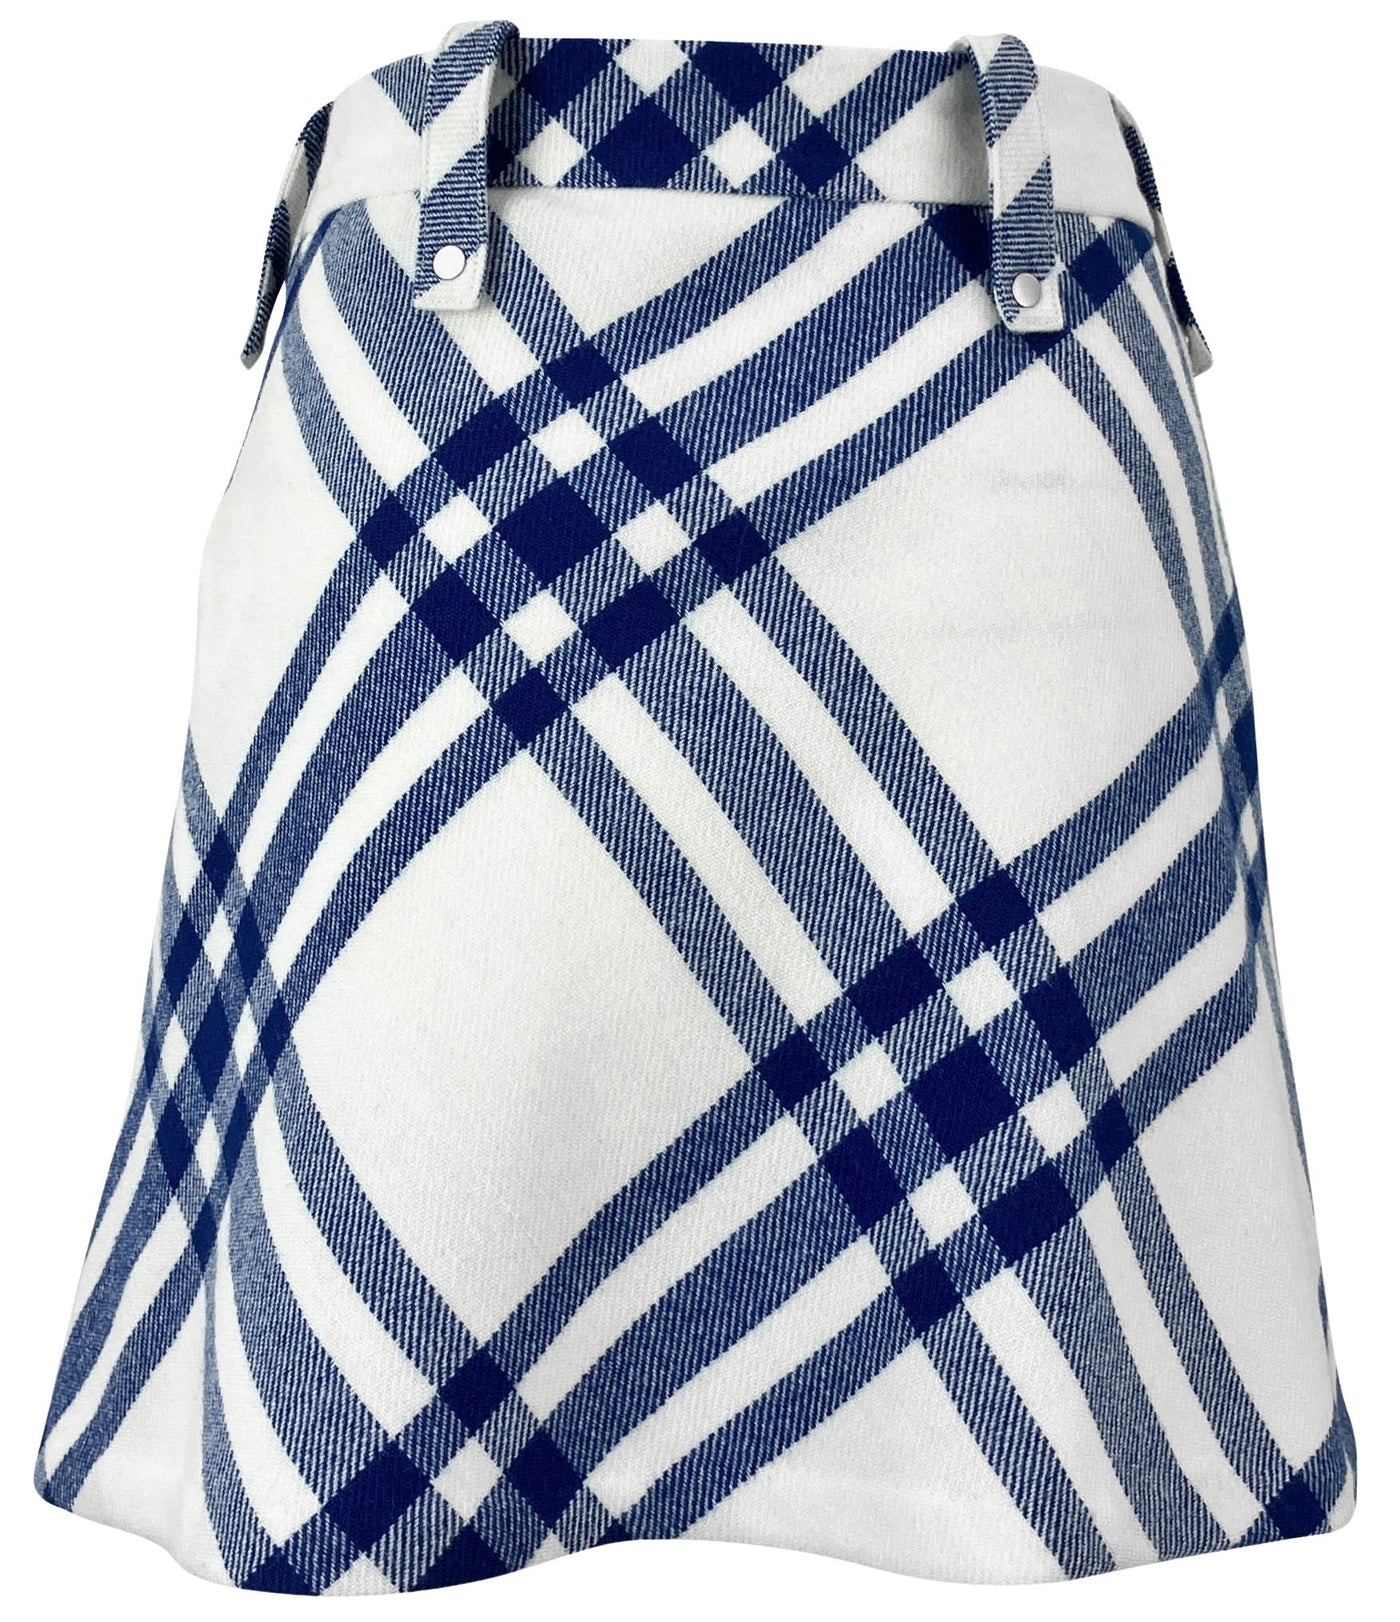 Burberry Knight Check Draped Skirt in Knight IP Check - Discounts on Burberry at UAL